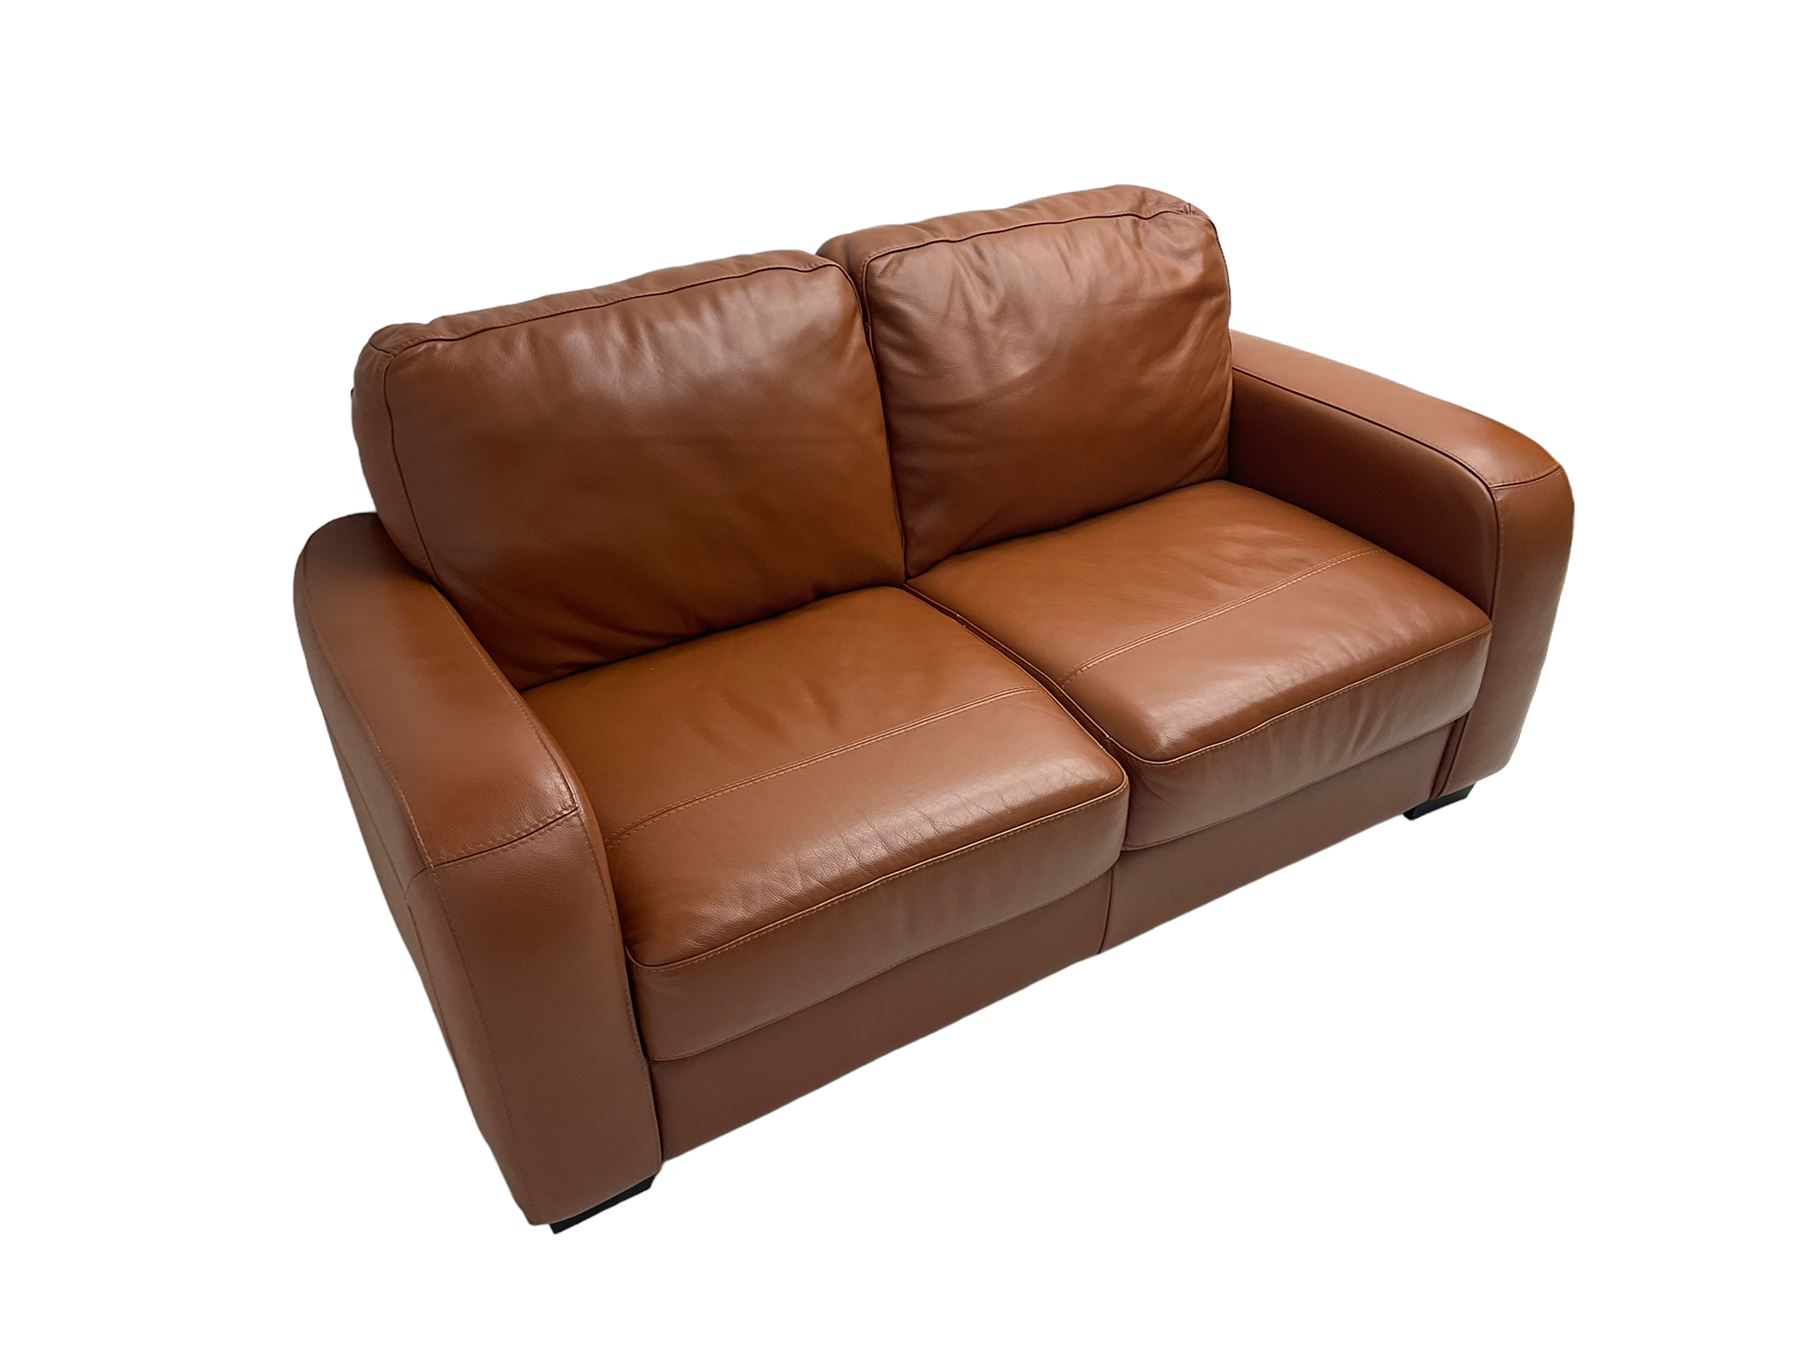 Two seat sofa - Image 6 of 6